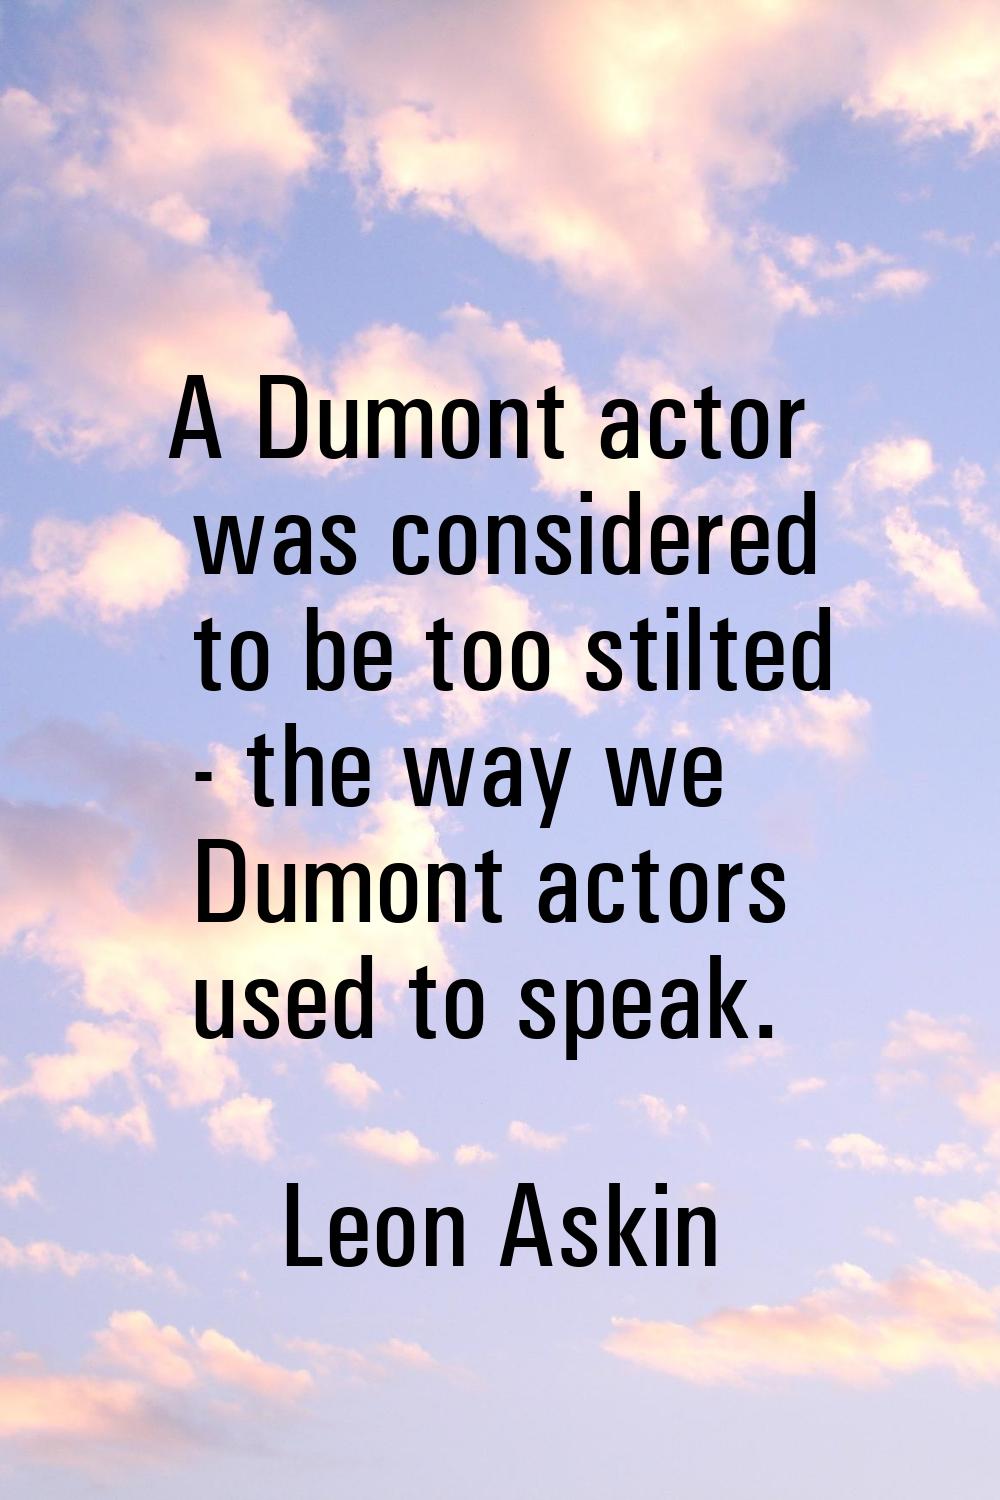 A Dumont actor was considered to be too stilted - the way we Dumont actors used to speak.